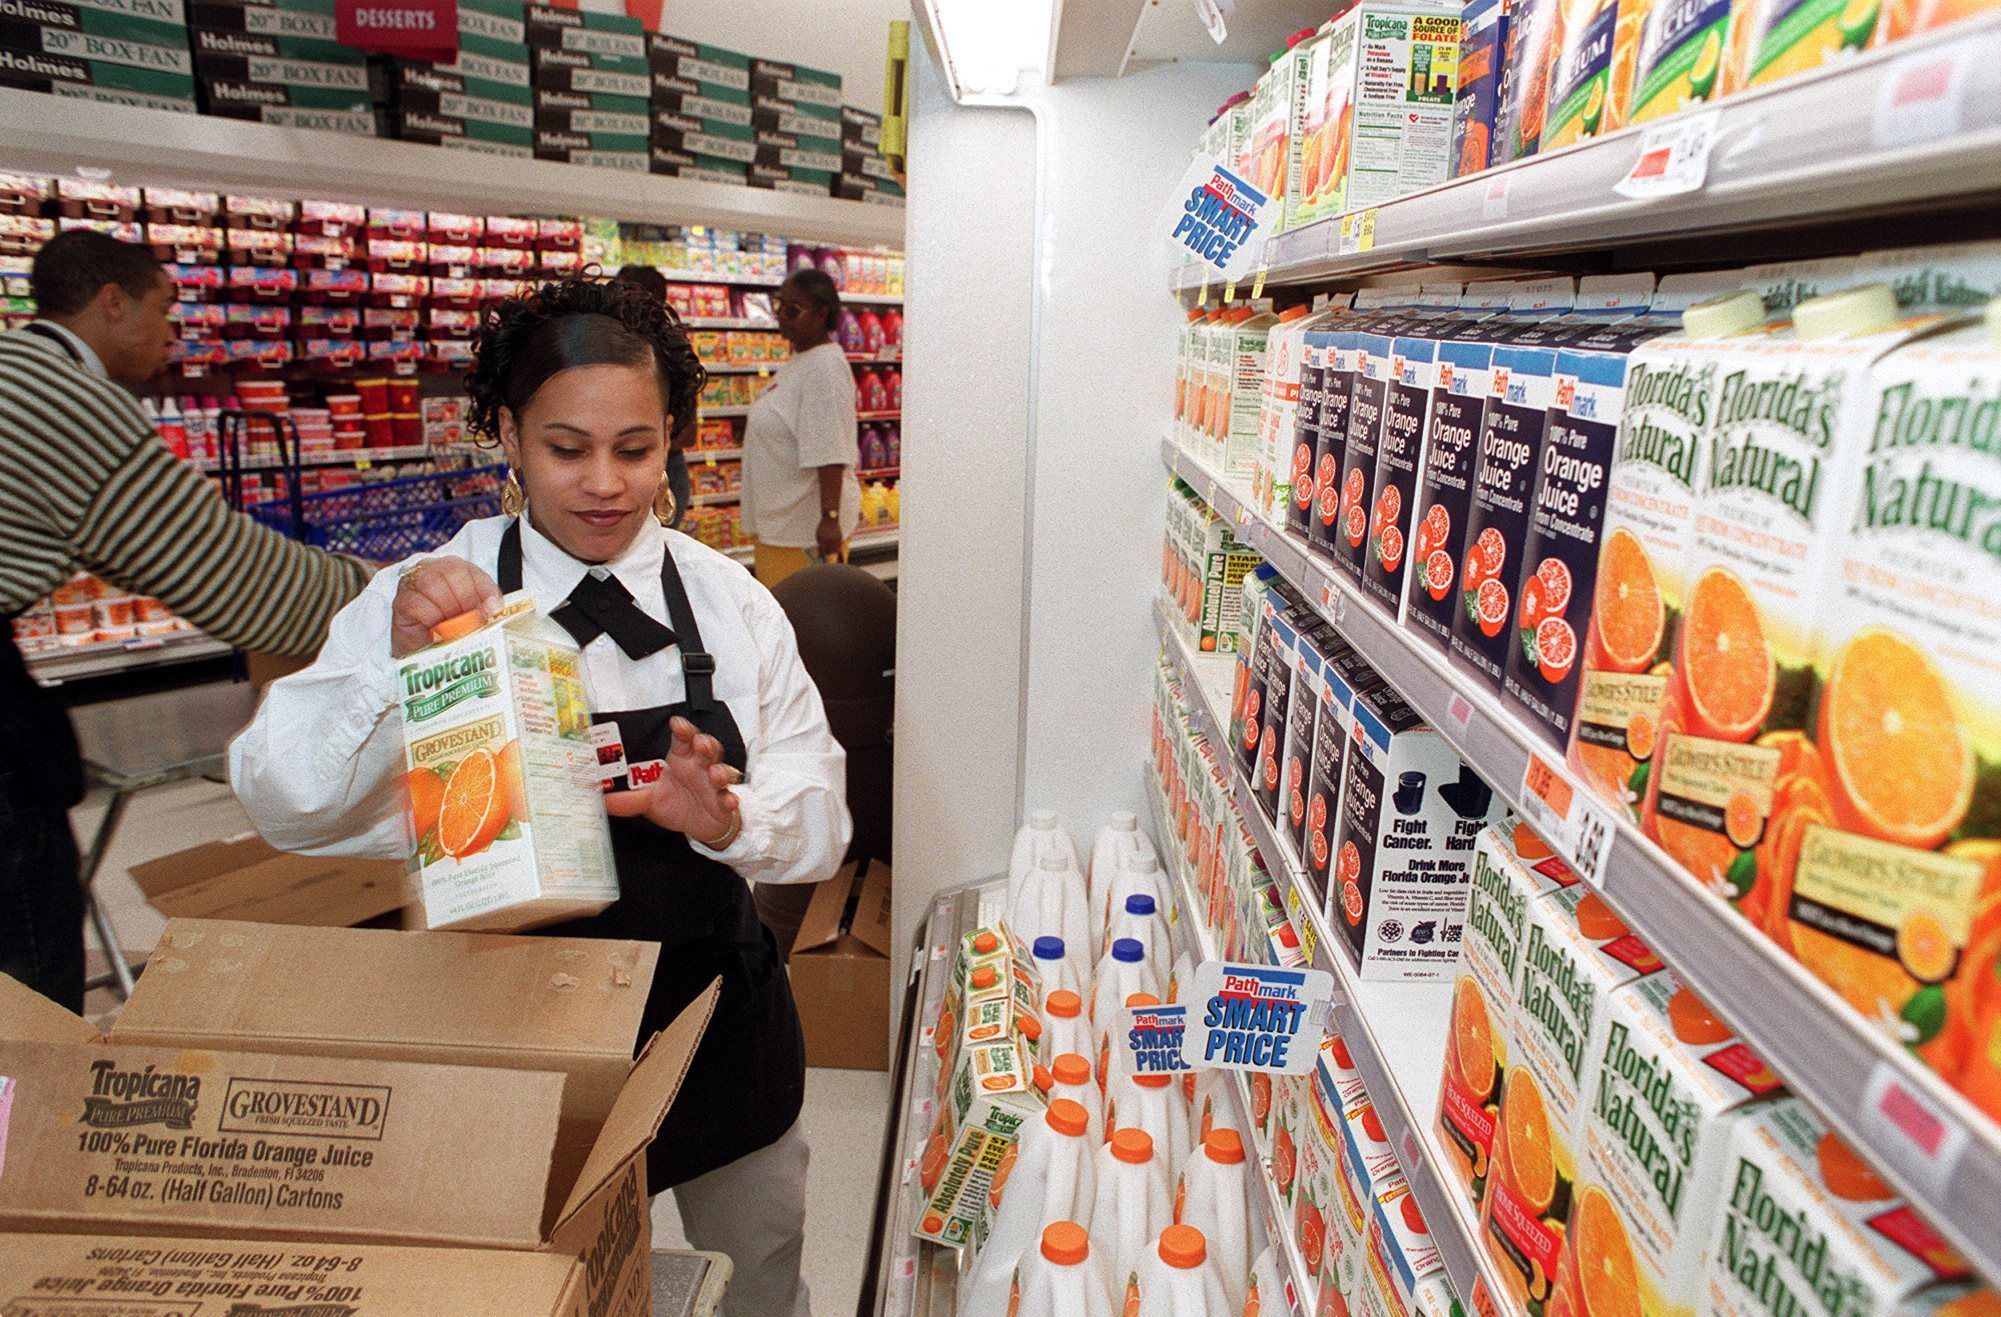 Grocery Delivery Trades Community for Convenience